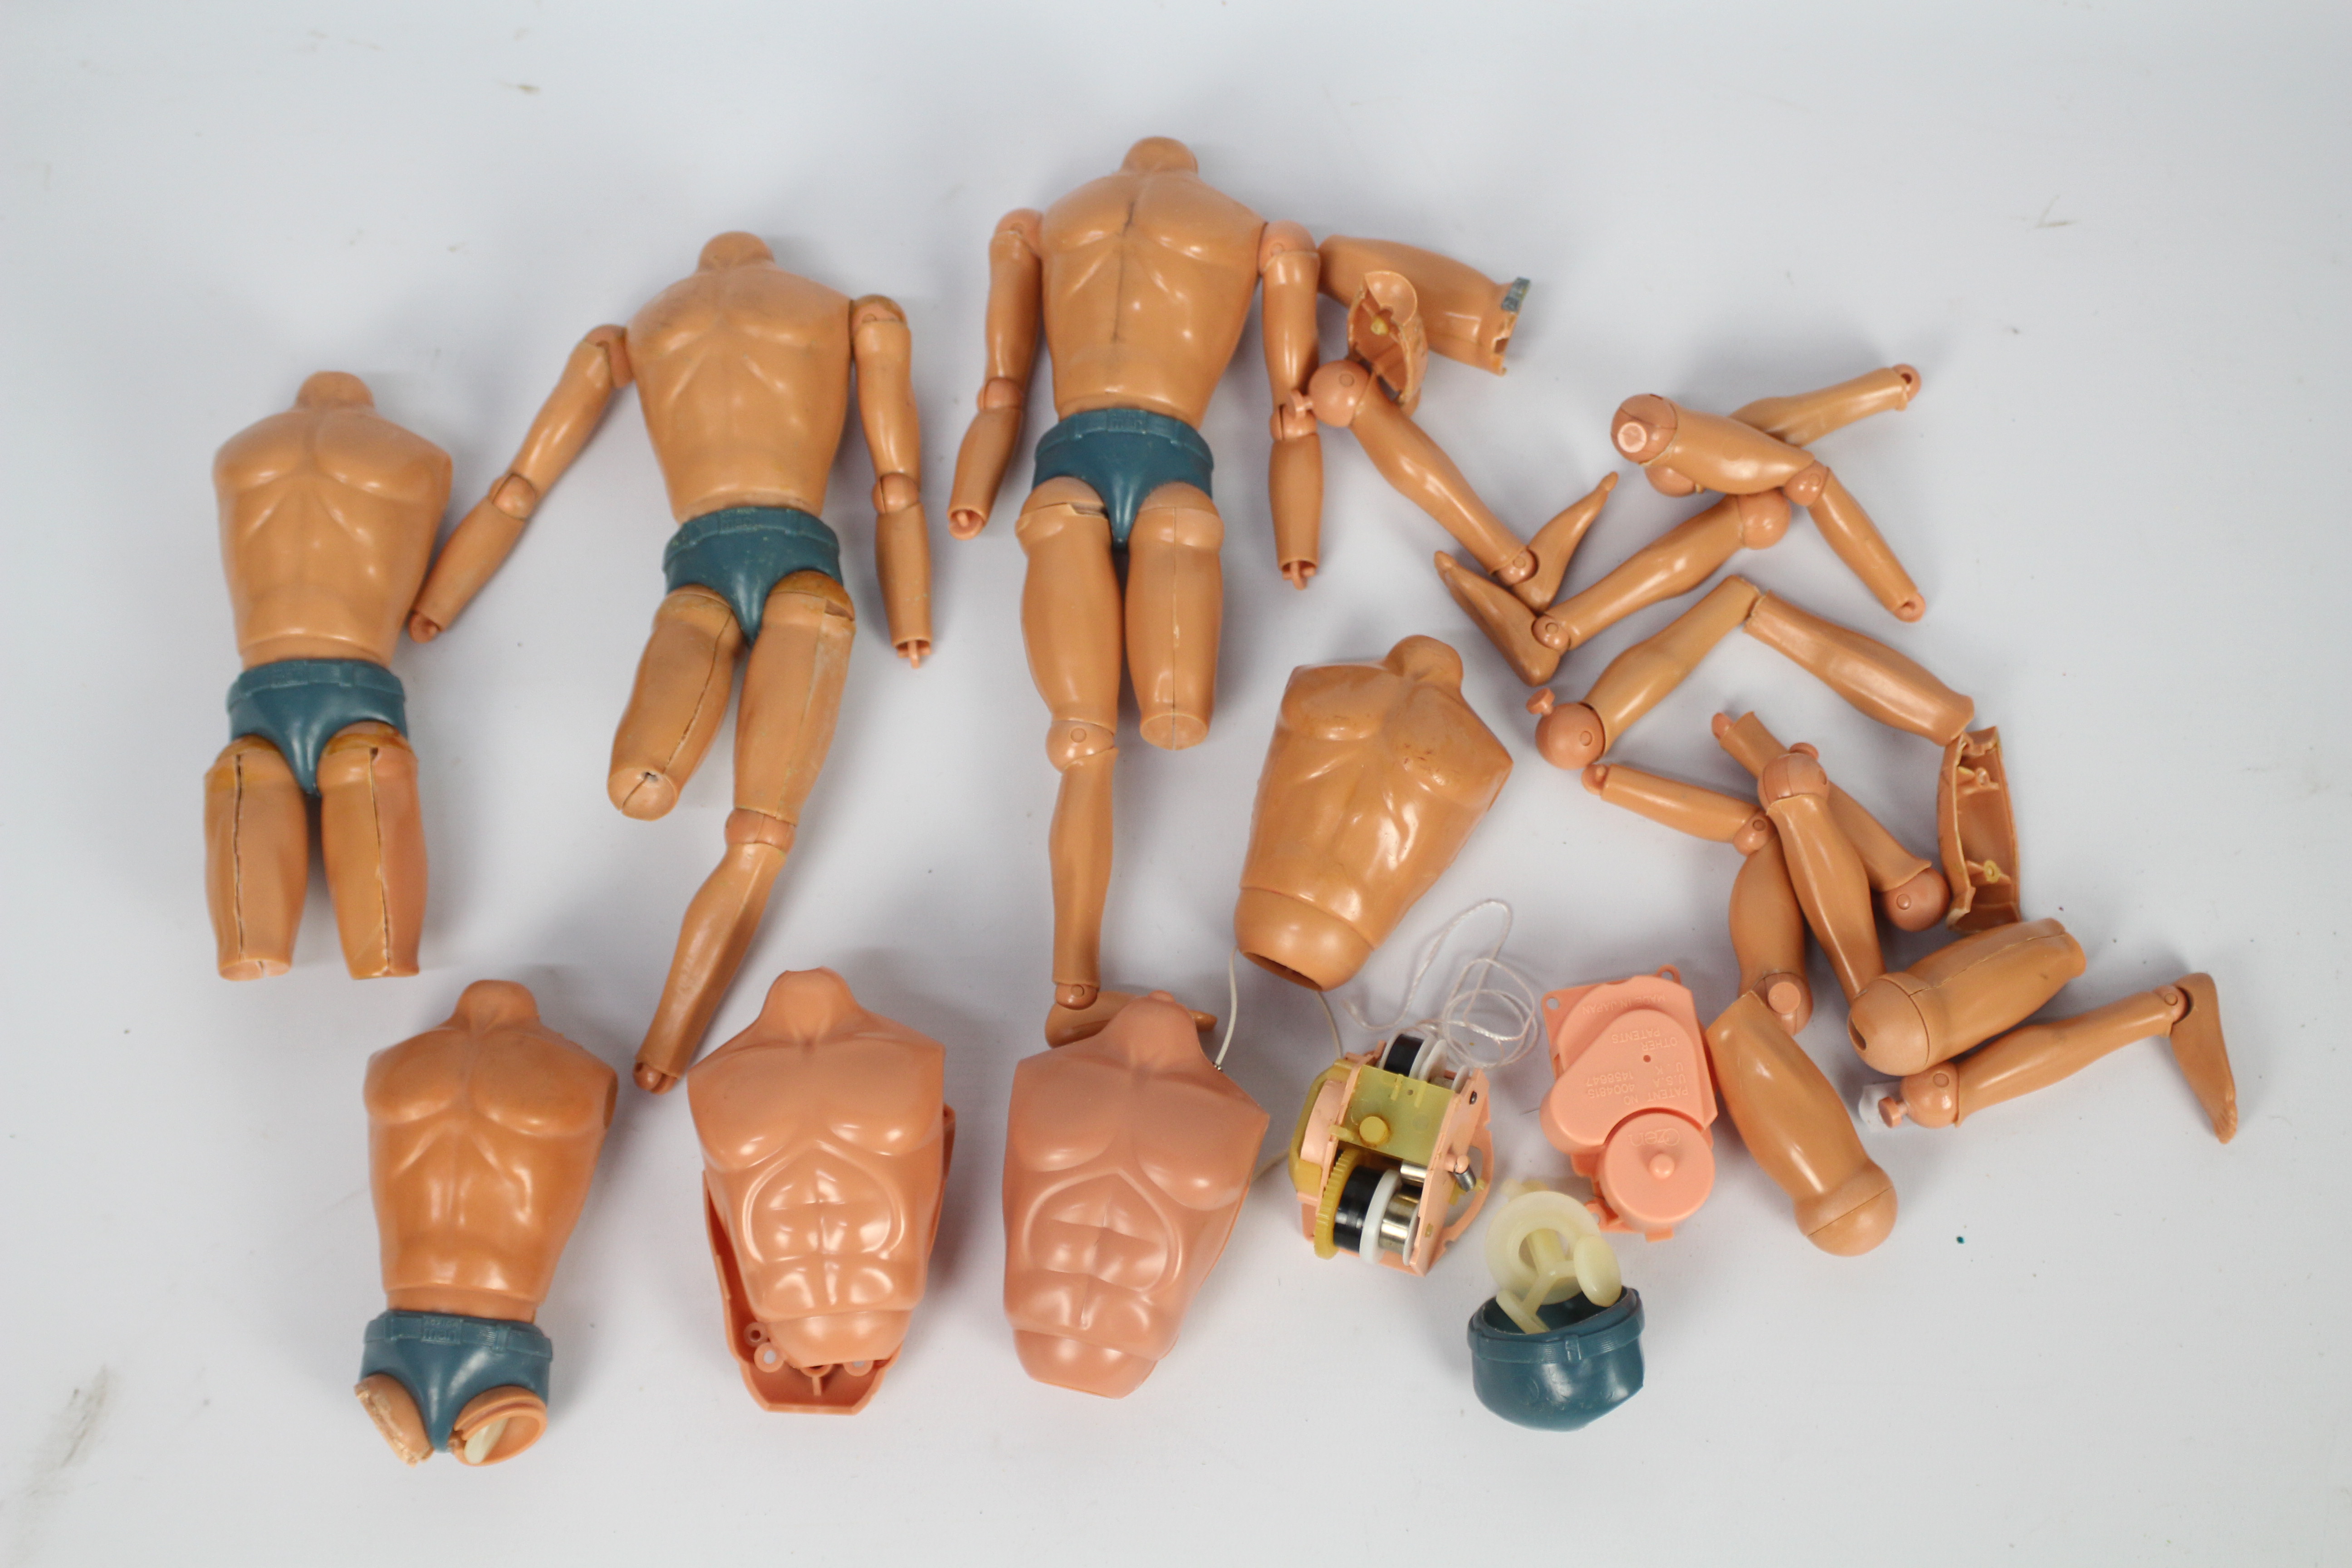 Palitoy, Hasbro, Action Man - A collection of Action Man body parts.